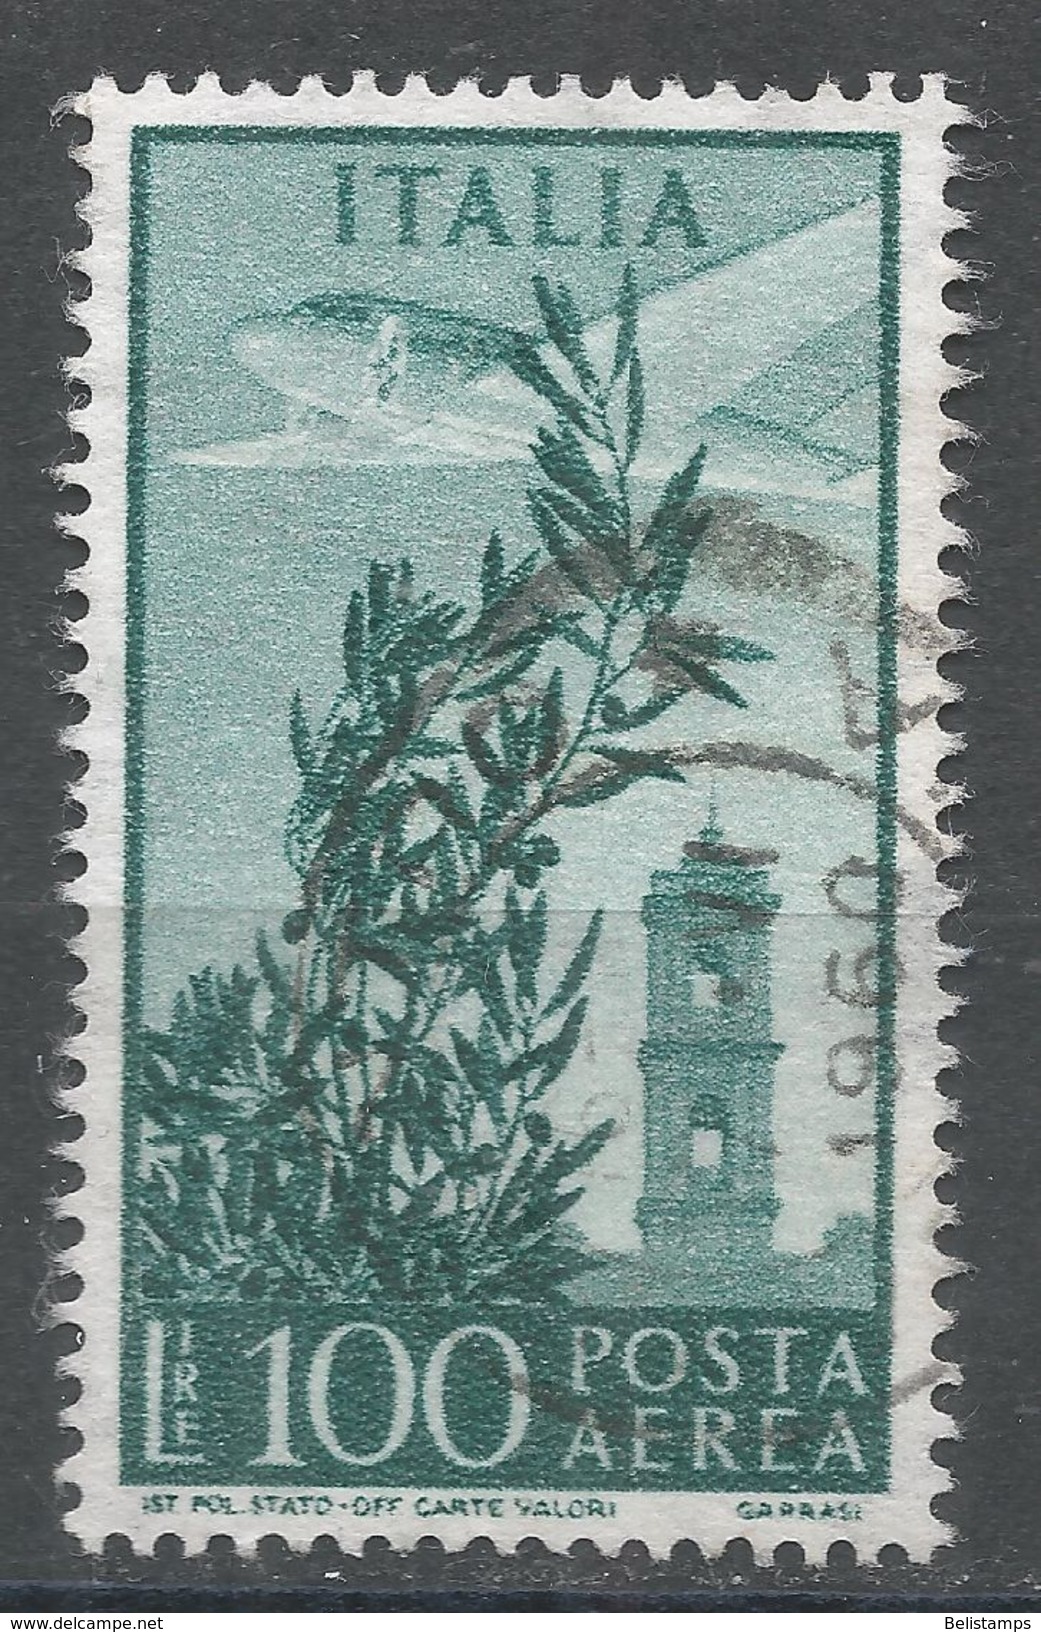 Italy 1955. Scott #C132 (U) Plane Over Capitol Bell Tower - Airmail